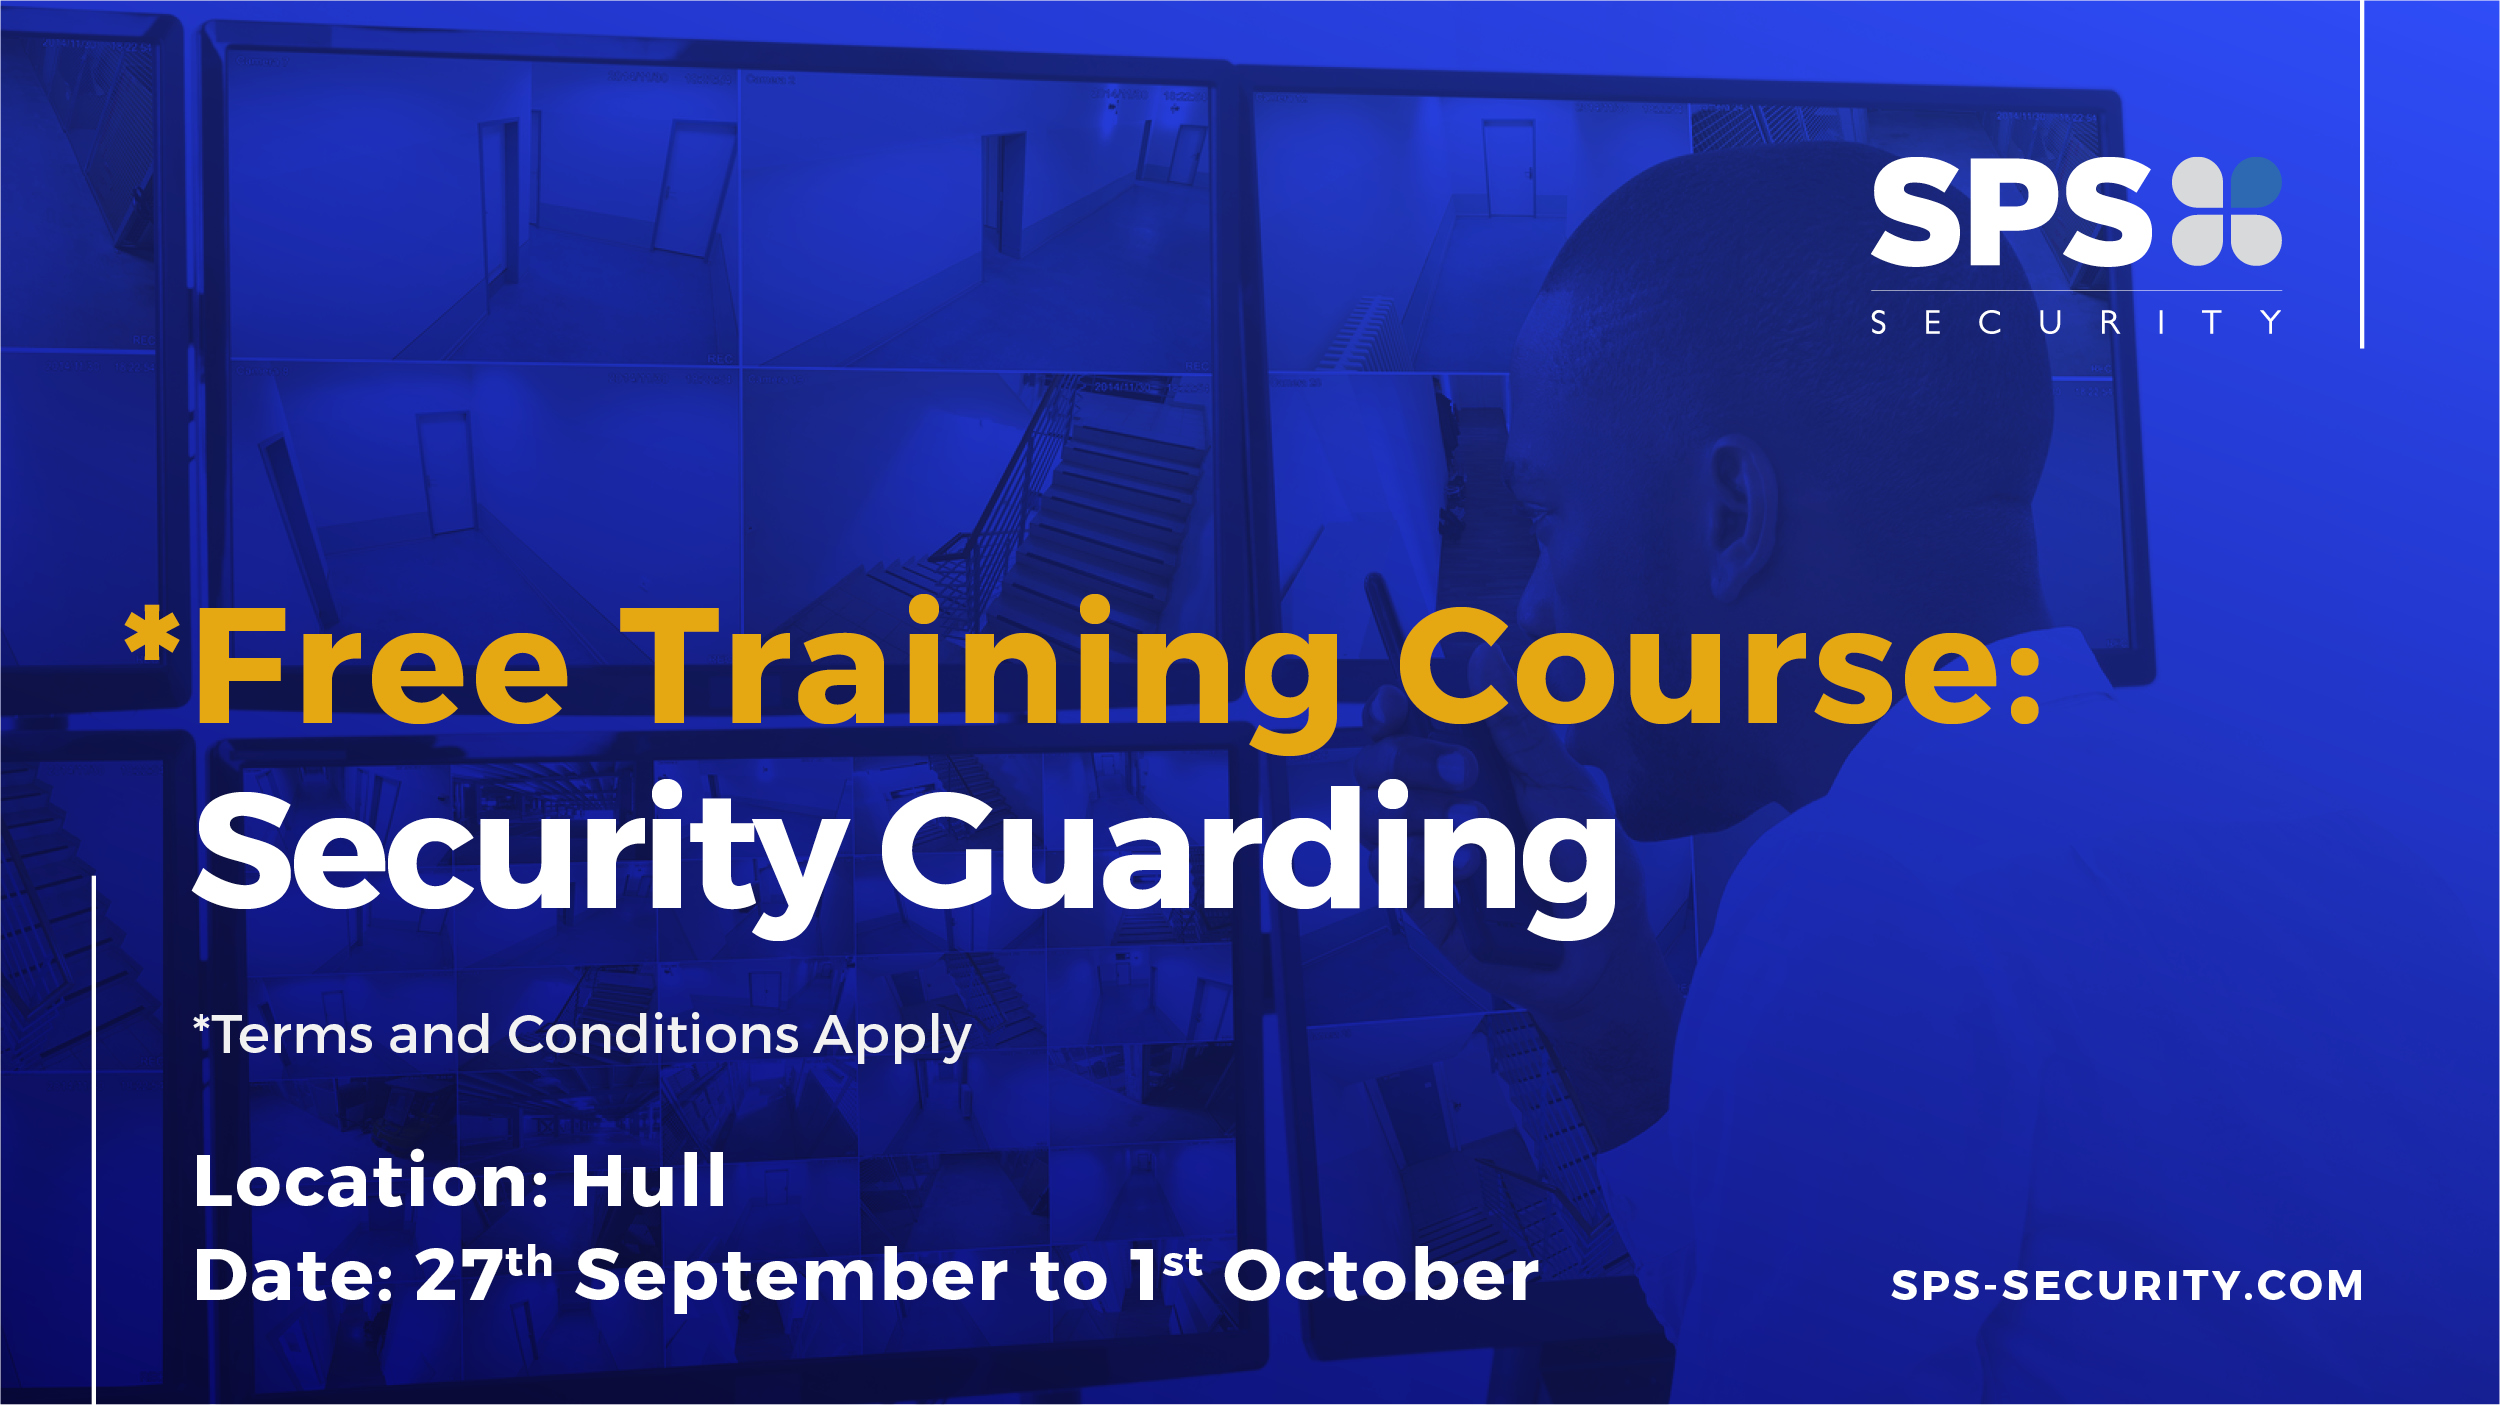 FREE* Security Guard Training Course SPS Security Services Mobile